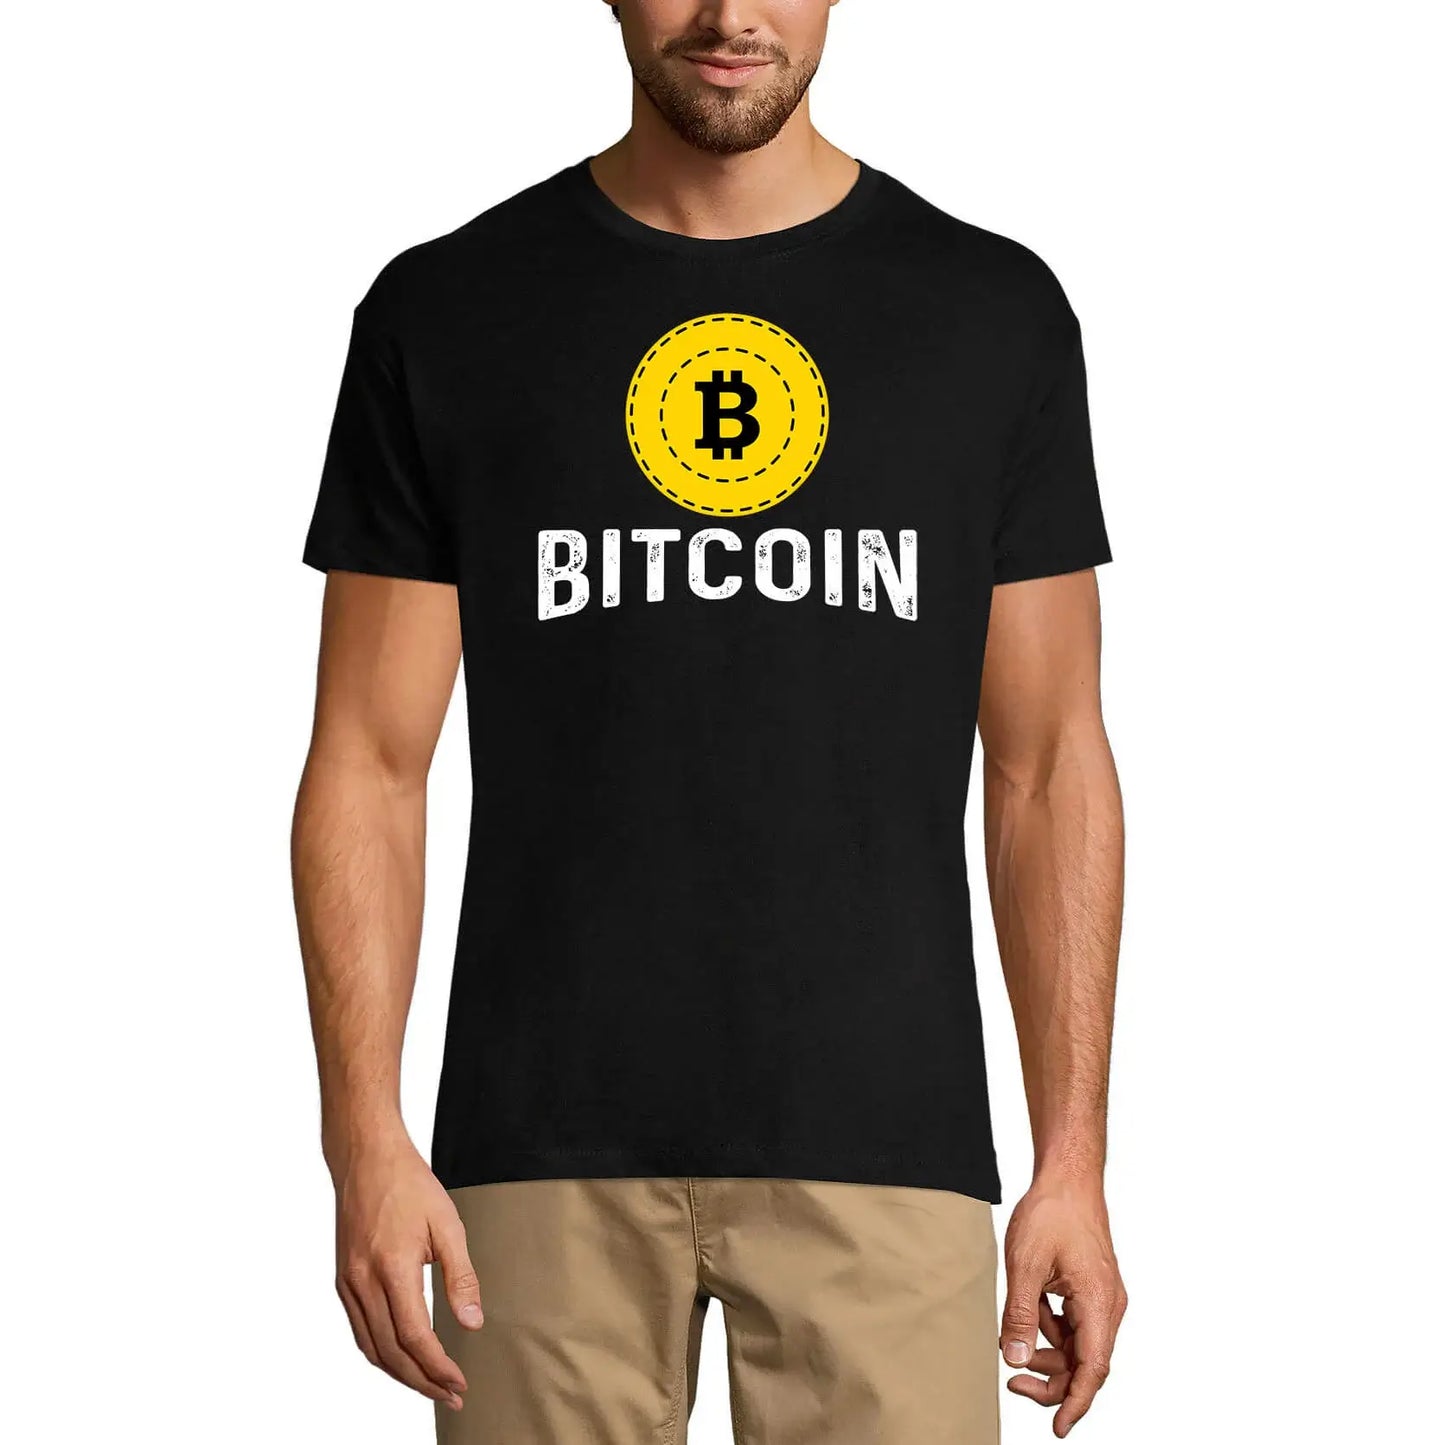 Men's Graphic T-Shirt Bitcoin Cryptocurrency - One Coin Funny - Blockchain Eco-Friendly Limited Edition Short Sleeve Tee-Shirt Vintage Birthday Gift Novelty